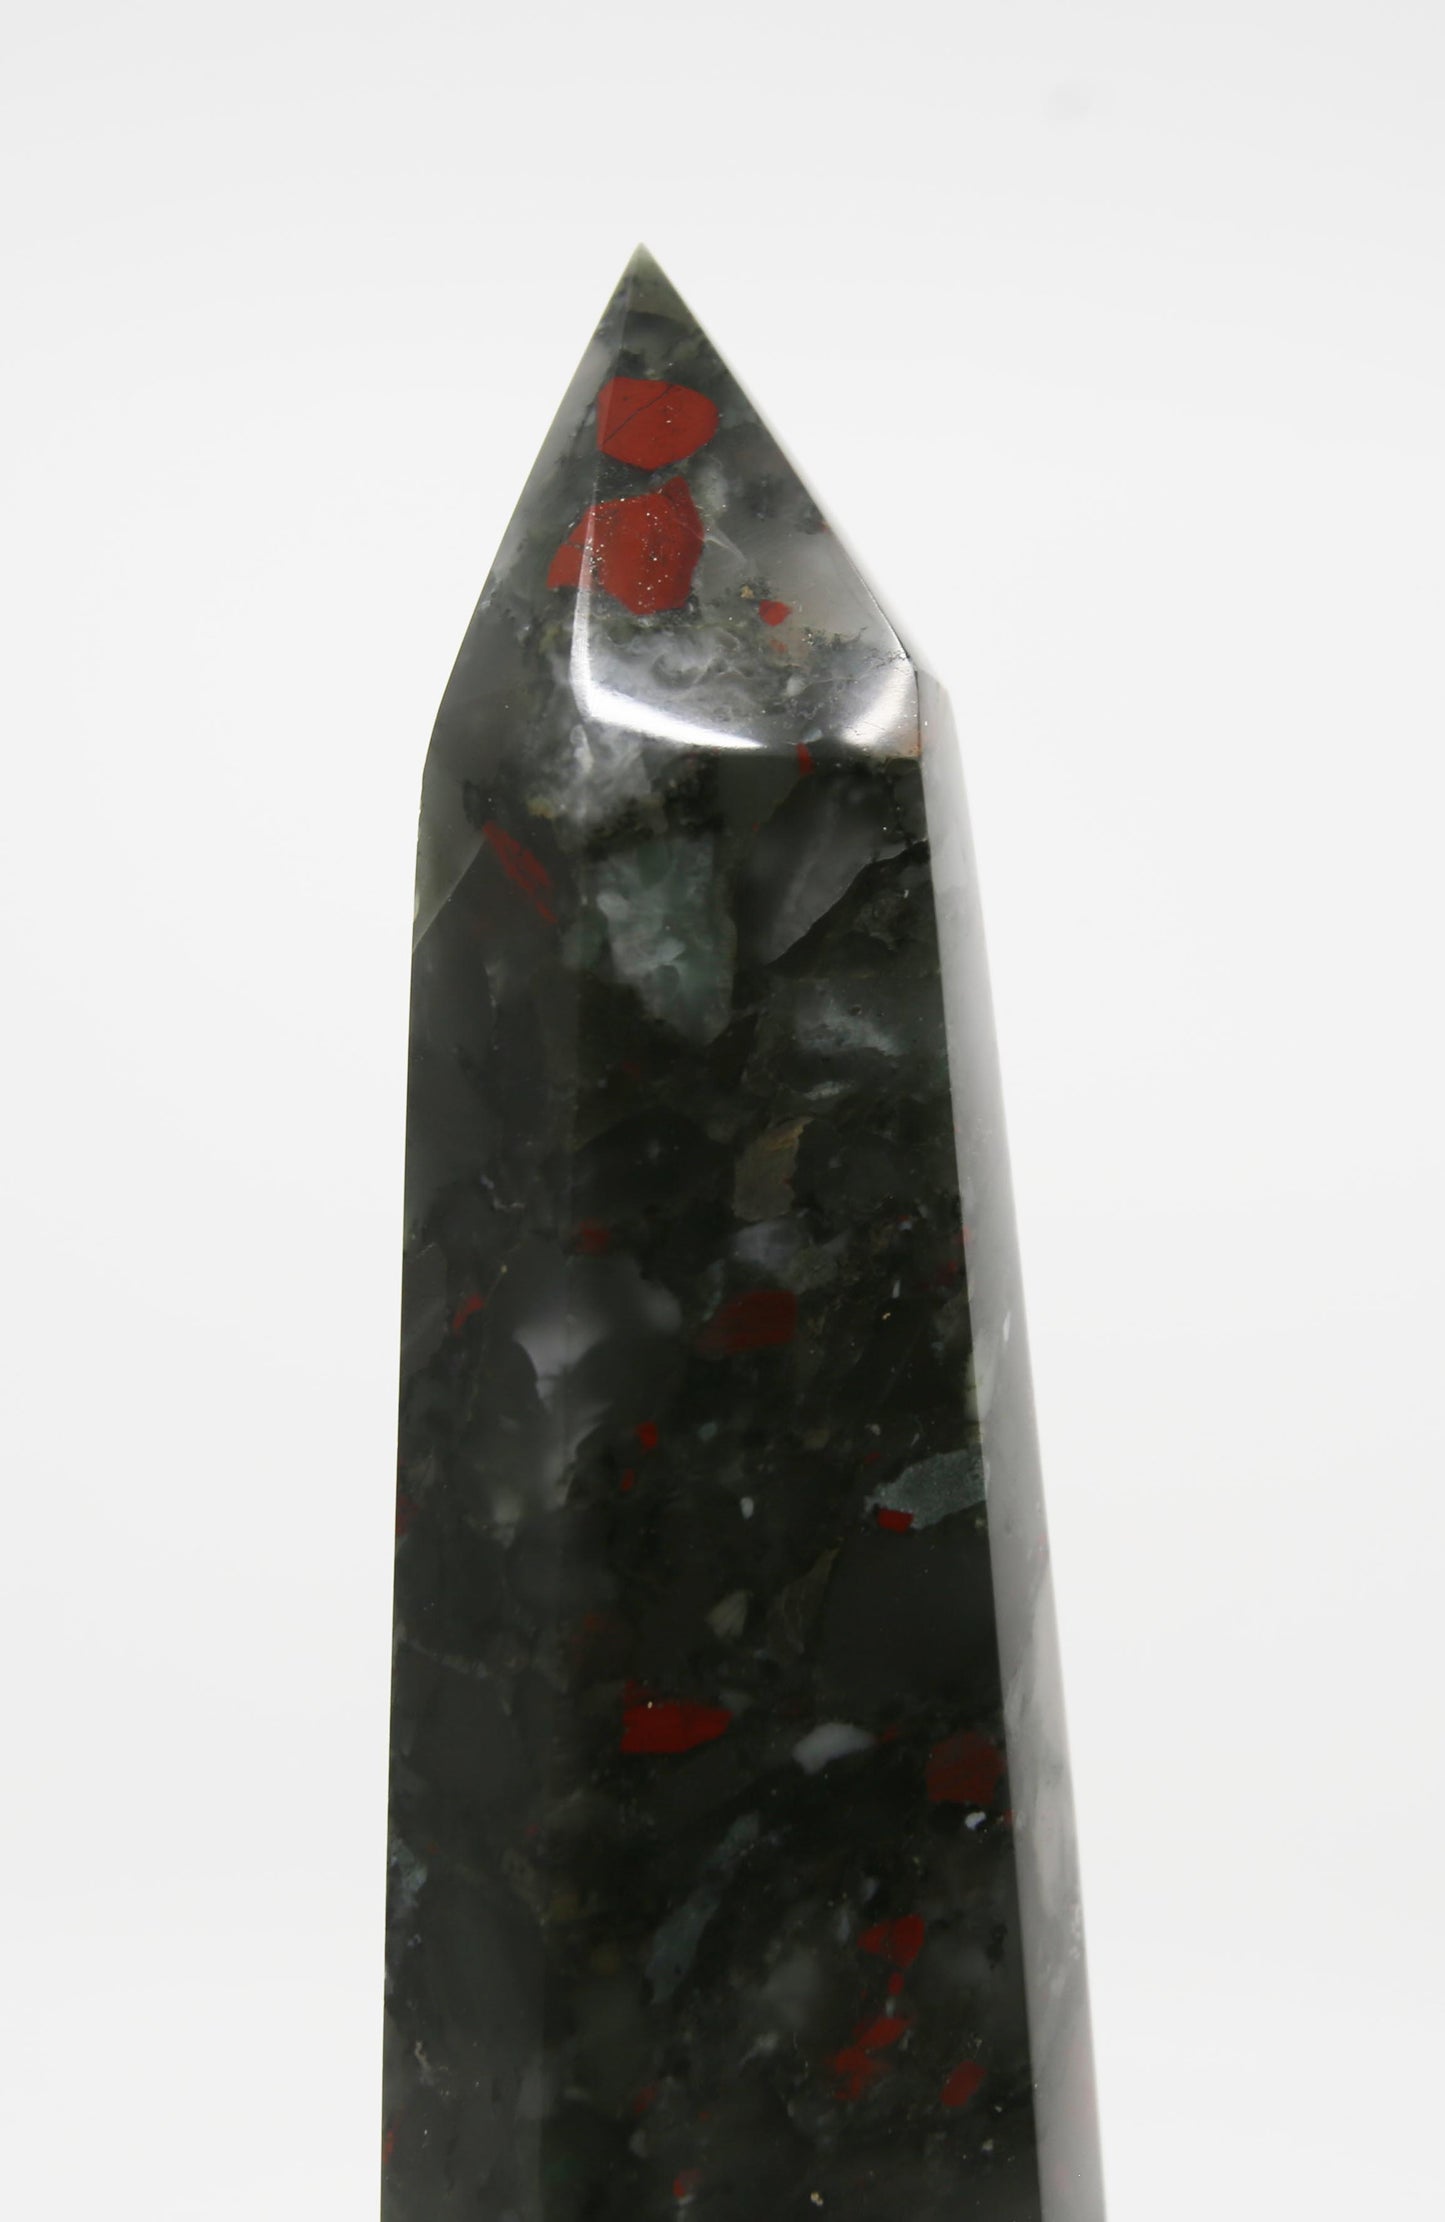 Large Bloodstone Tower with Pyrite Flecks